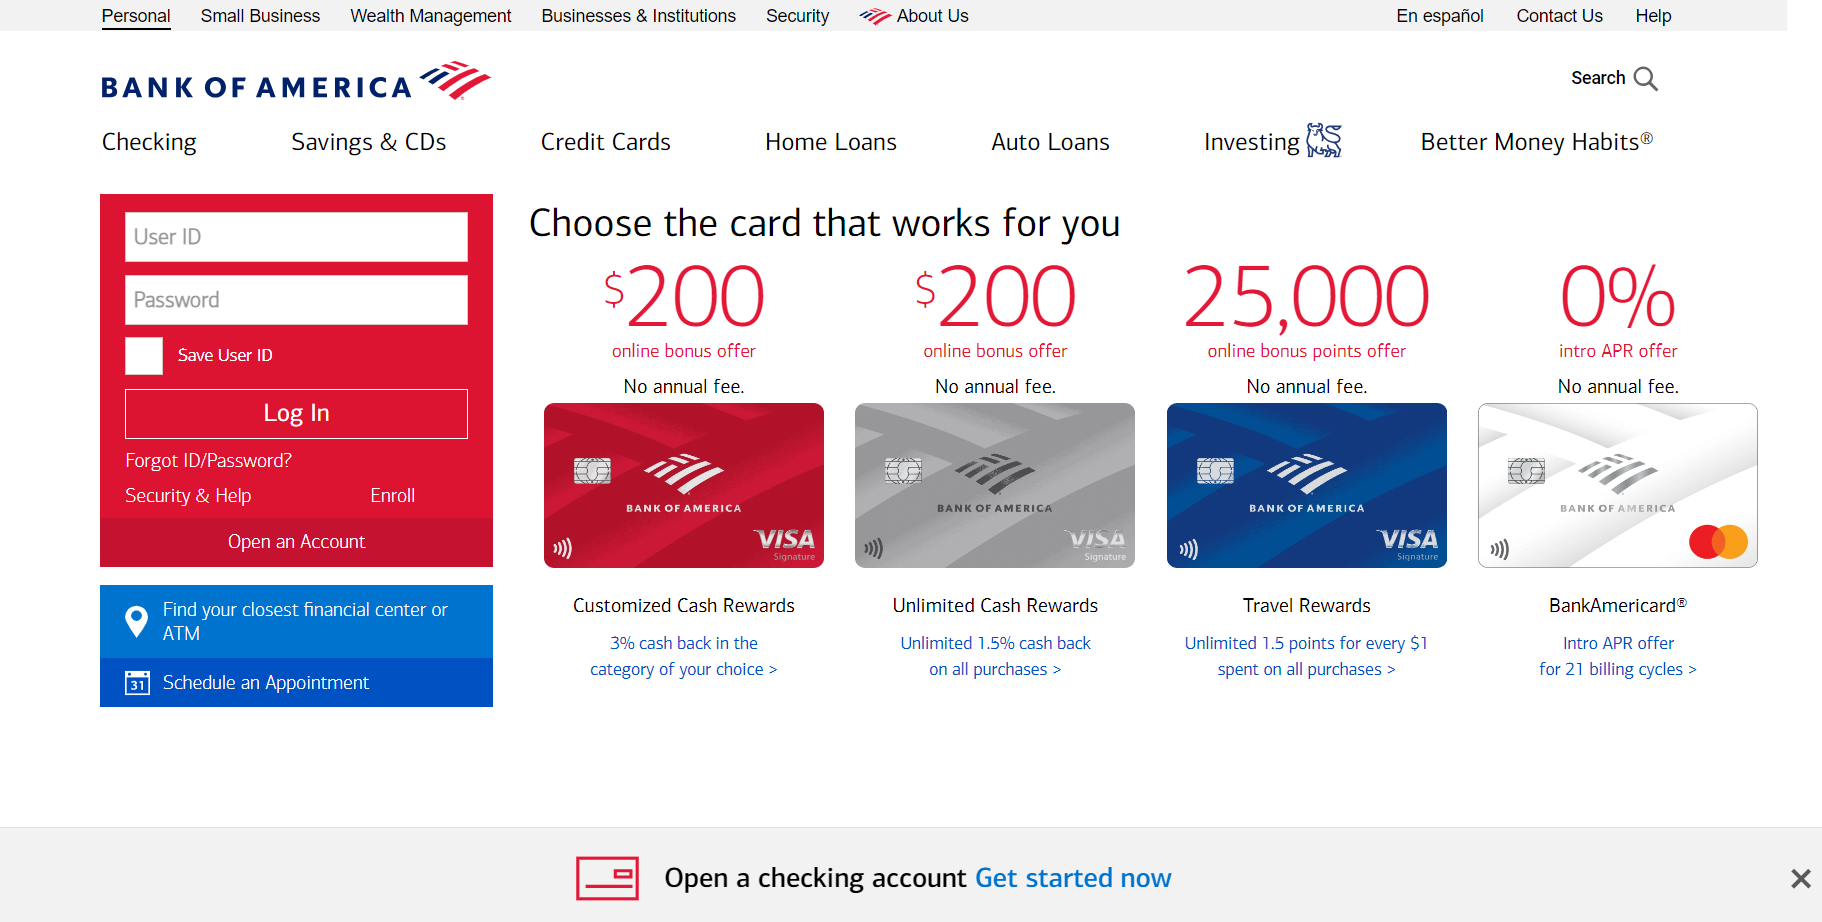 bank of america home page